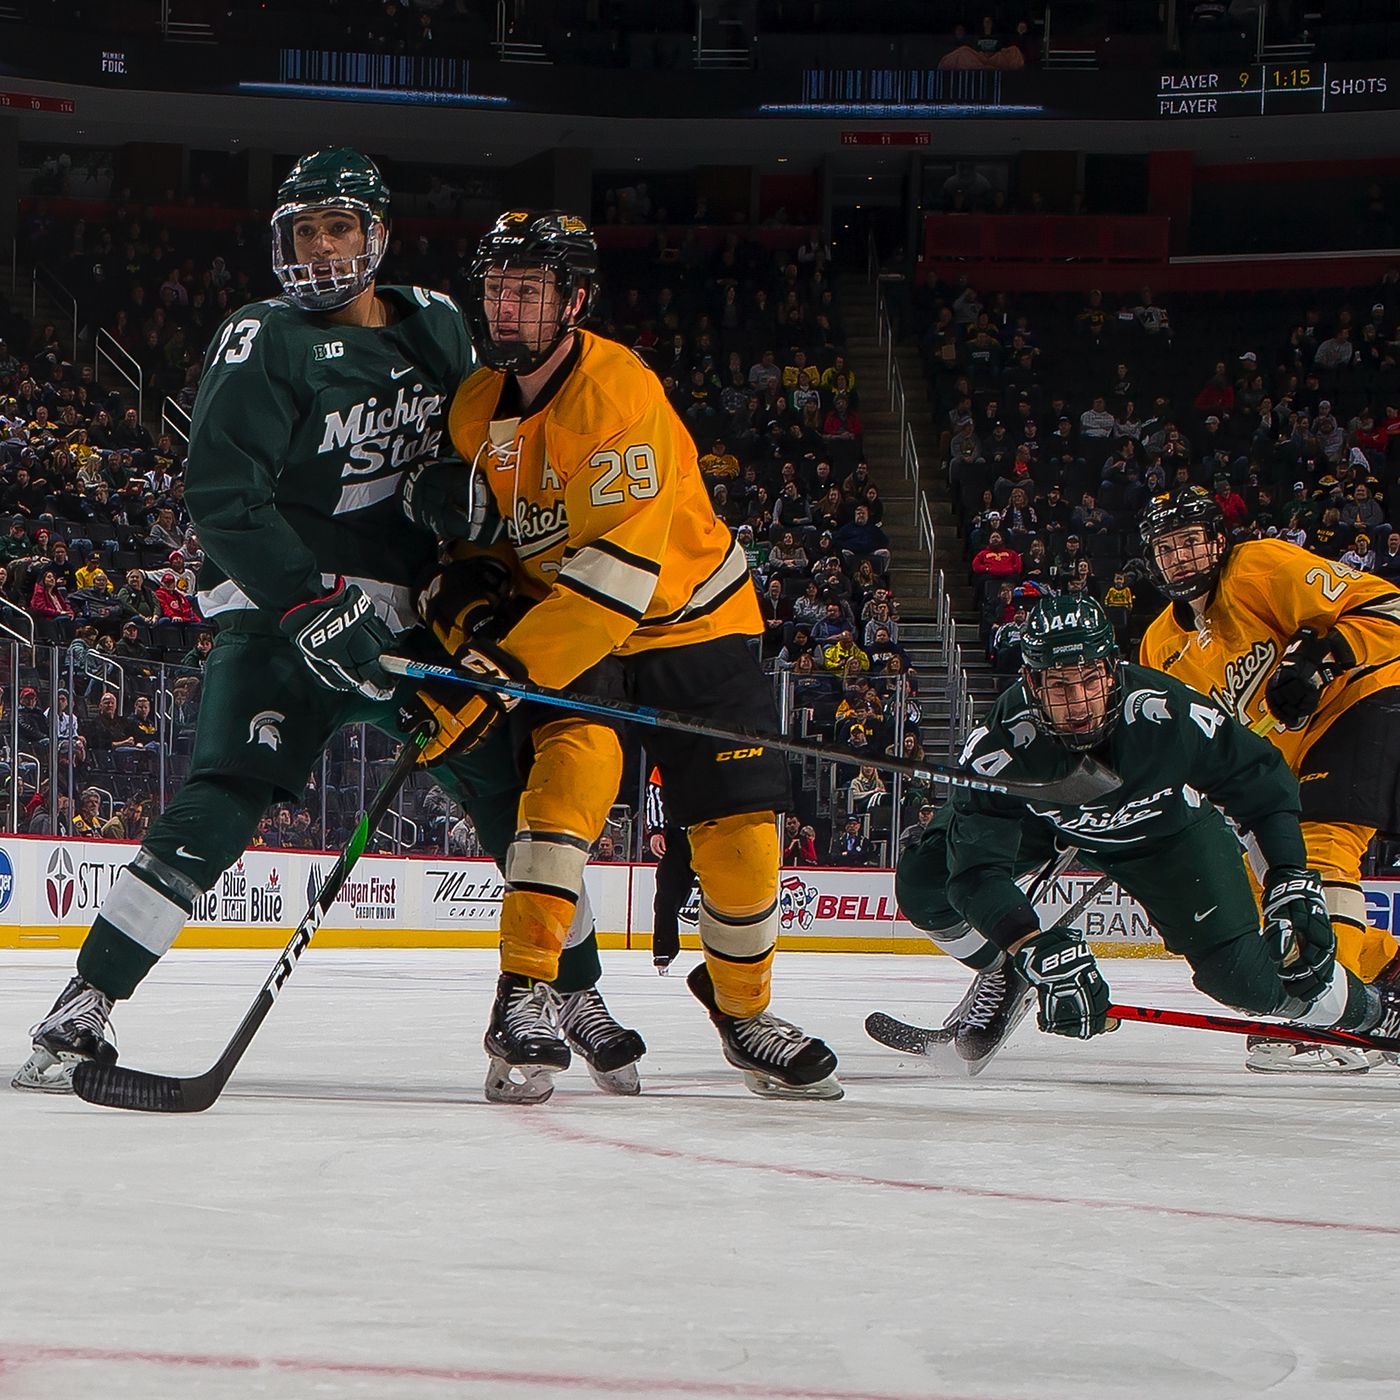 Msu Hockey Schedule 2022 Michigan State Hockey's 2021-22 Non-Conference Schedule Released - The Only  Colors